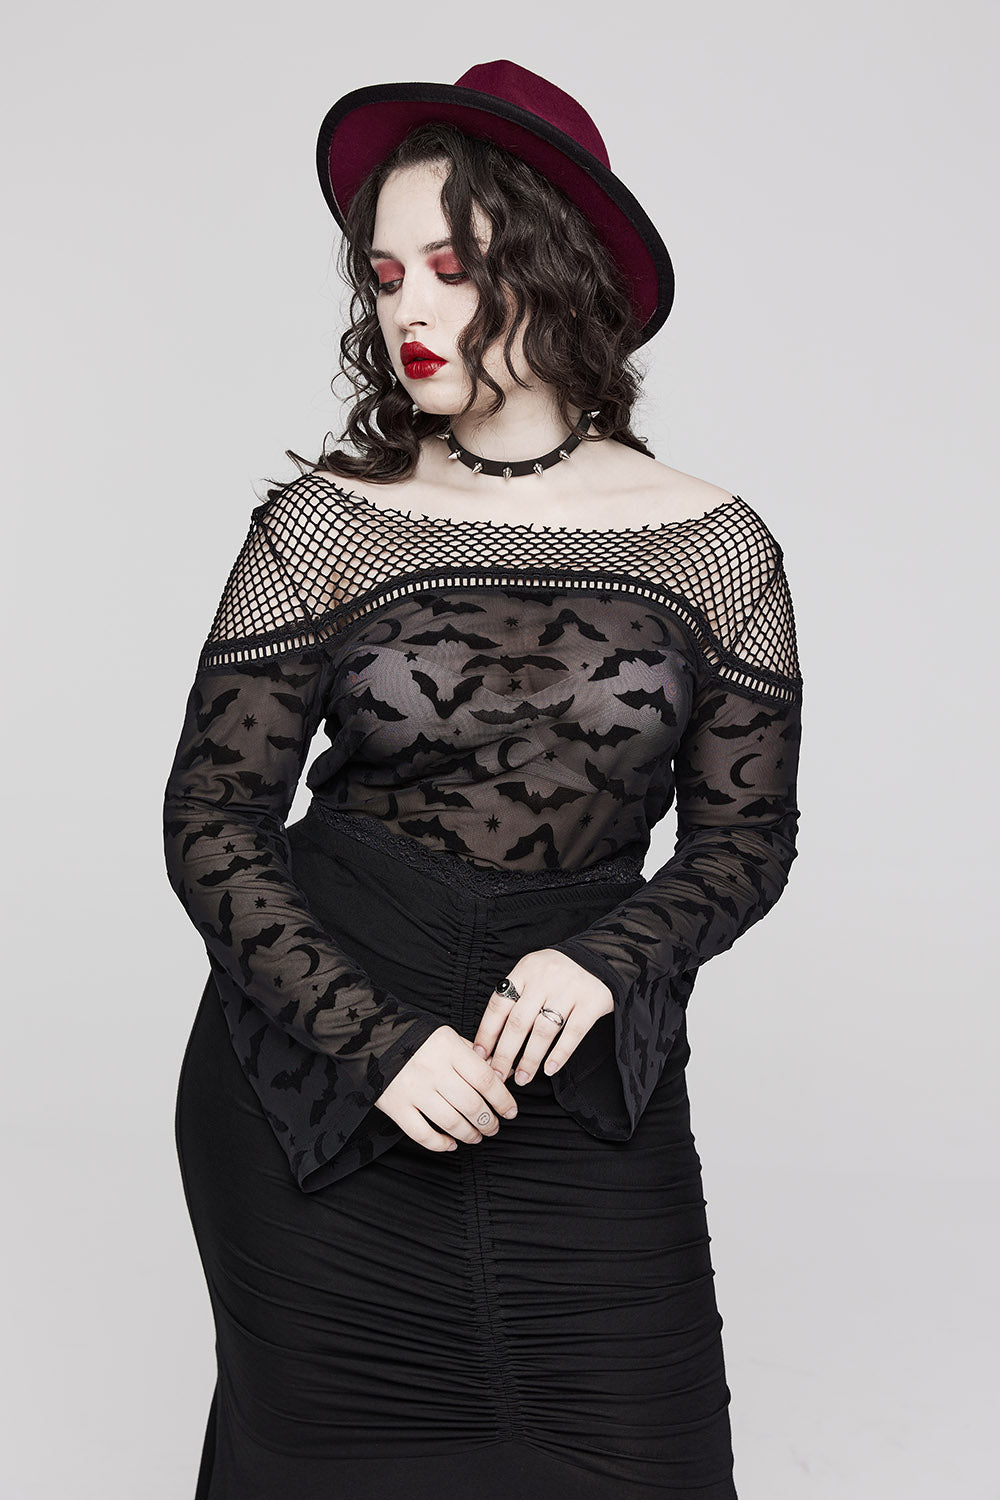 Plus Size Corset Tops for Women Vintage Gothic Off Shoulder Victorian Lace  Bustier Top Halloween Steampunk Clothes Black at  Women's Clothing  store